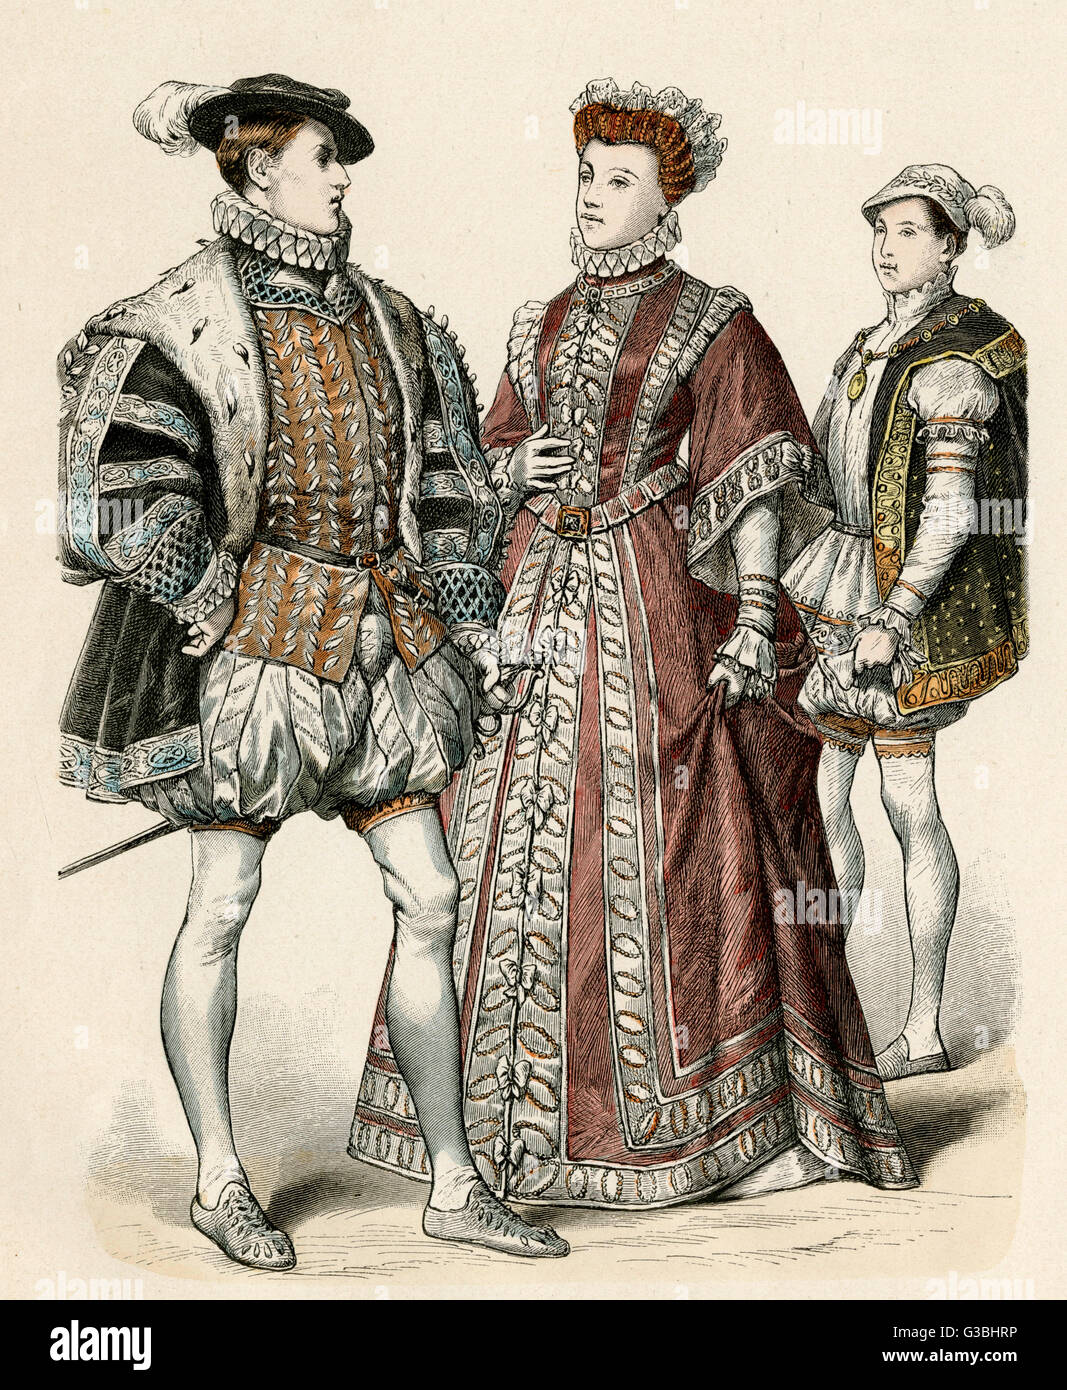 Man: trunk hose with 'panes' &amp;  padded with bombast, doublet,  cod-piece, cloak, flat cap  &amp; feather, ermine lined gown.  Woman: bodice &amp; skirt fastens down the front with bows.     Date: mid 16th century Stock Photo